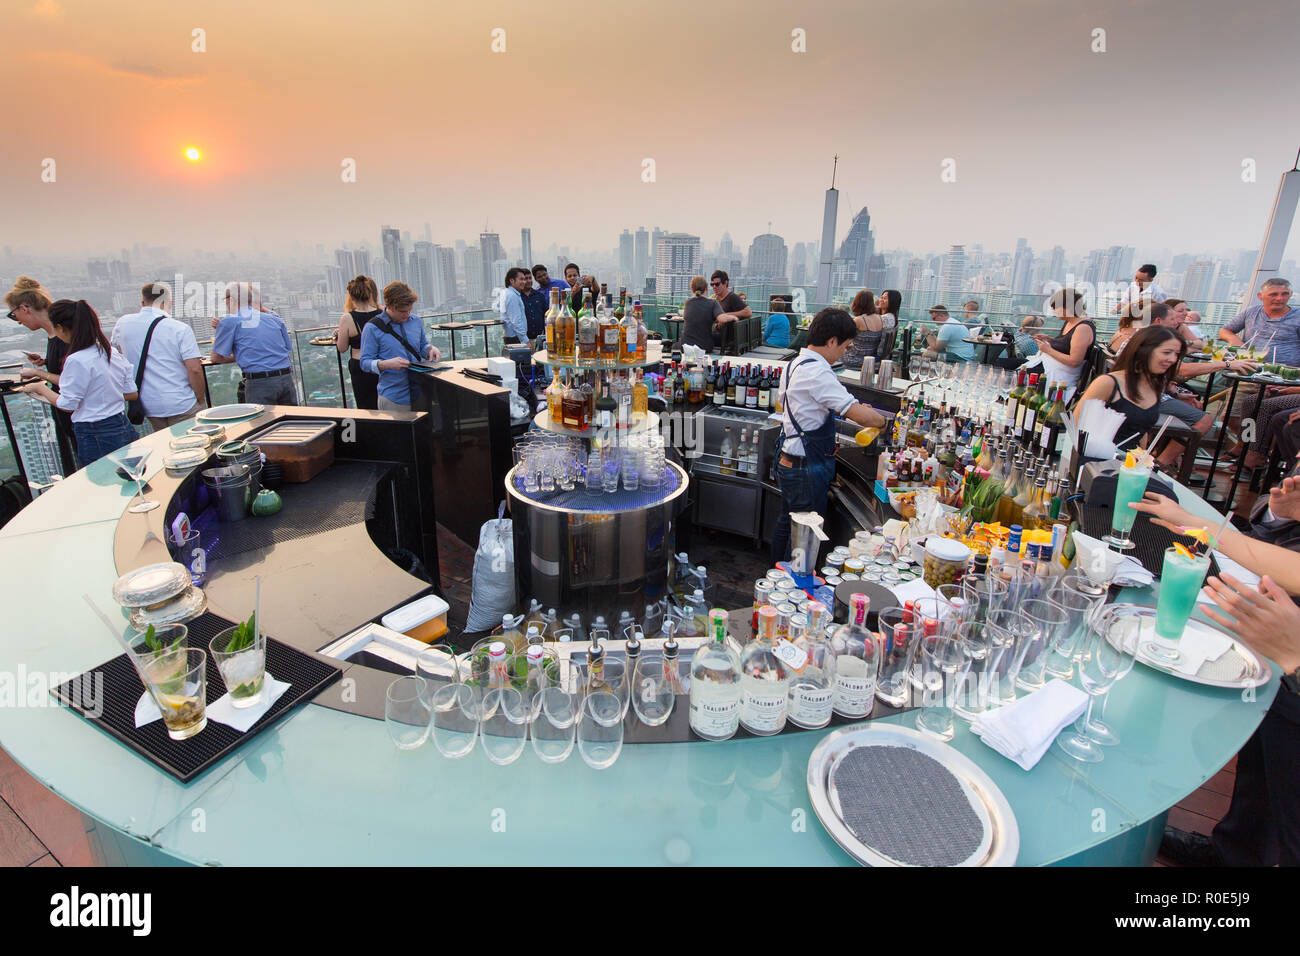 BANGKOK, THAILAND - FEBRUARY 10, 2017 : People drinking and enjoying the sunset at the Octave rooftop bar of the Marriott tower hotel in the Thong Lor Stock Photo